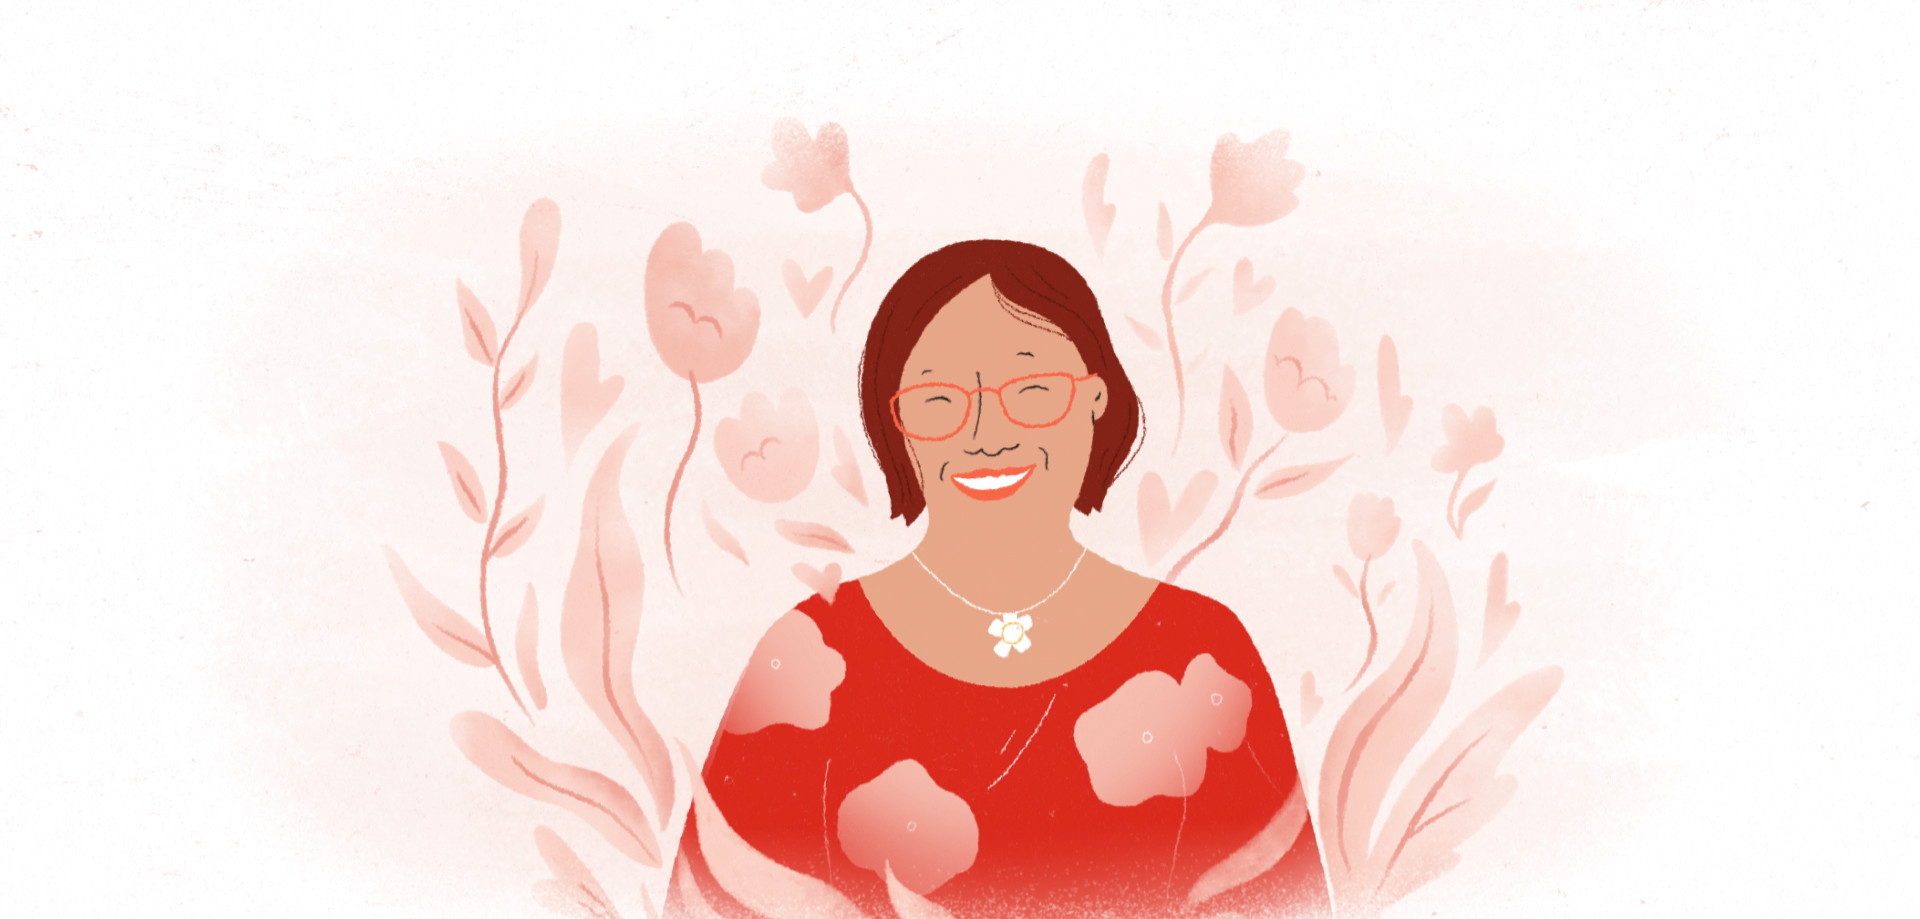 An illustration of a person surrounded by flowers, wearing glasses, a pink flowery outfit and flower necklace.